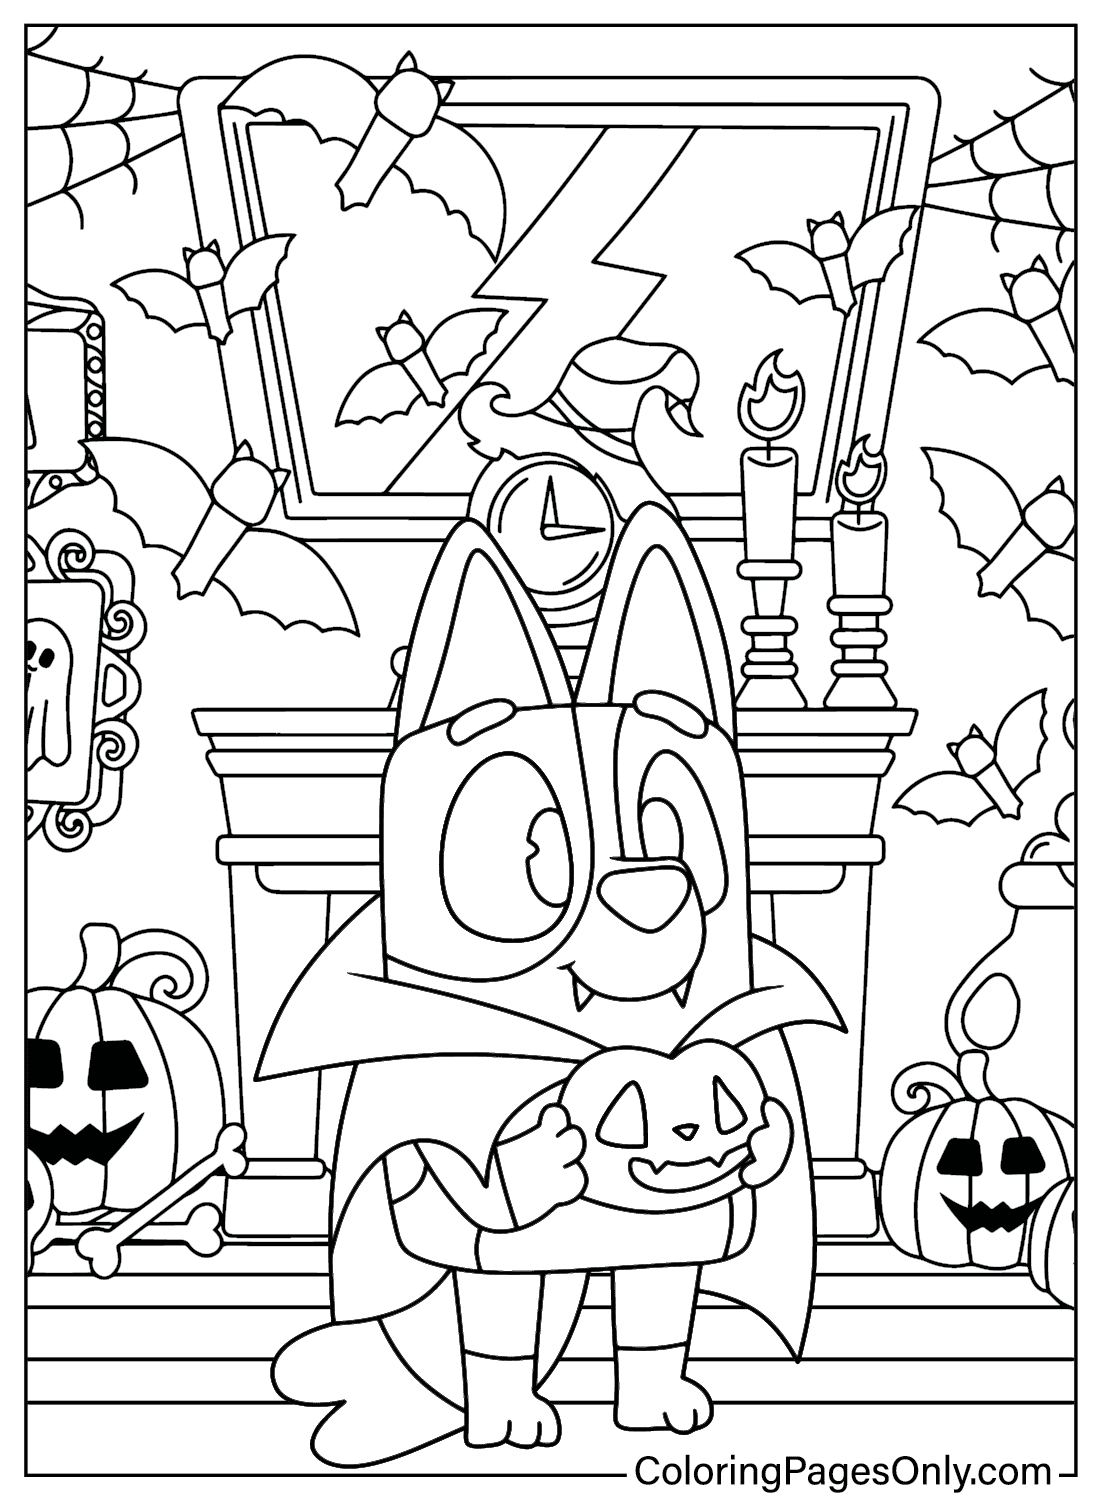 Free Printable Bluey Halloween Coloring Page from Bluey Halloween